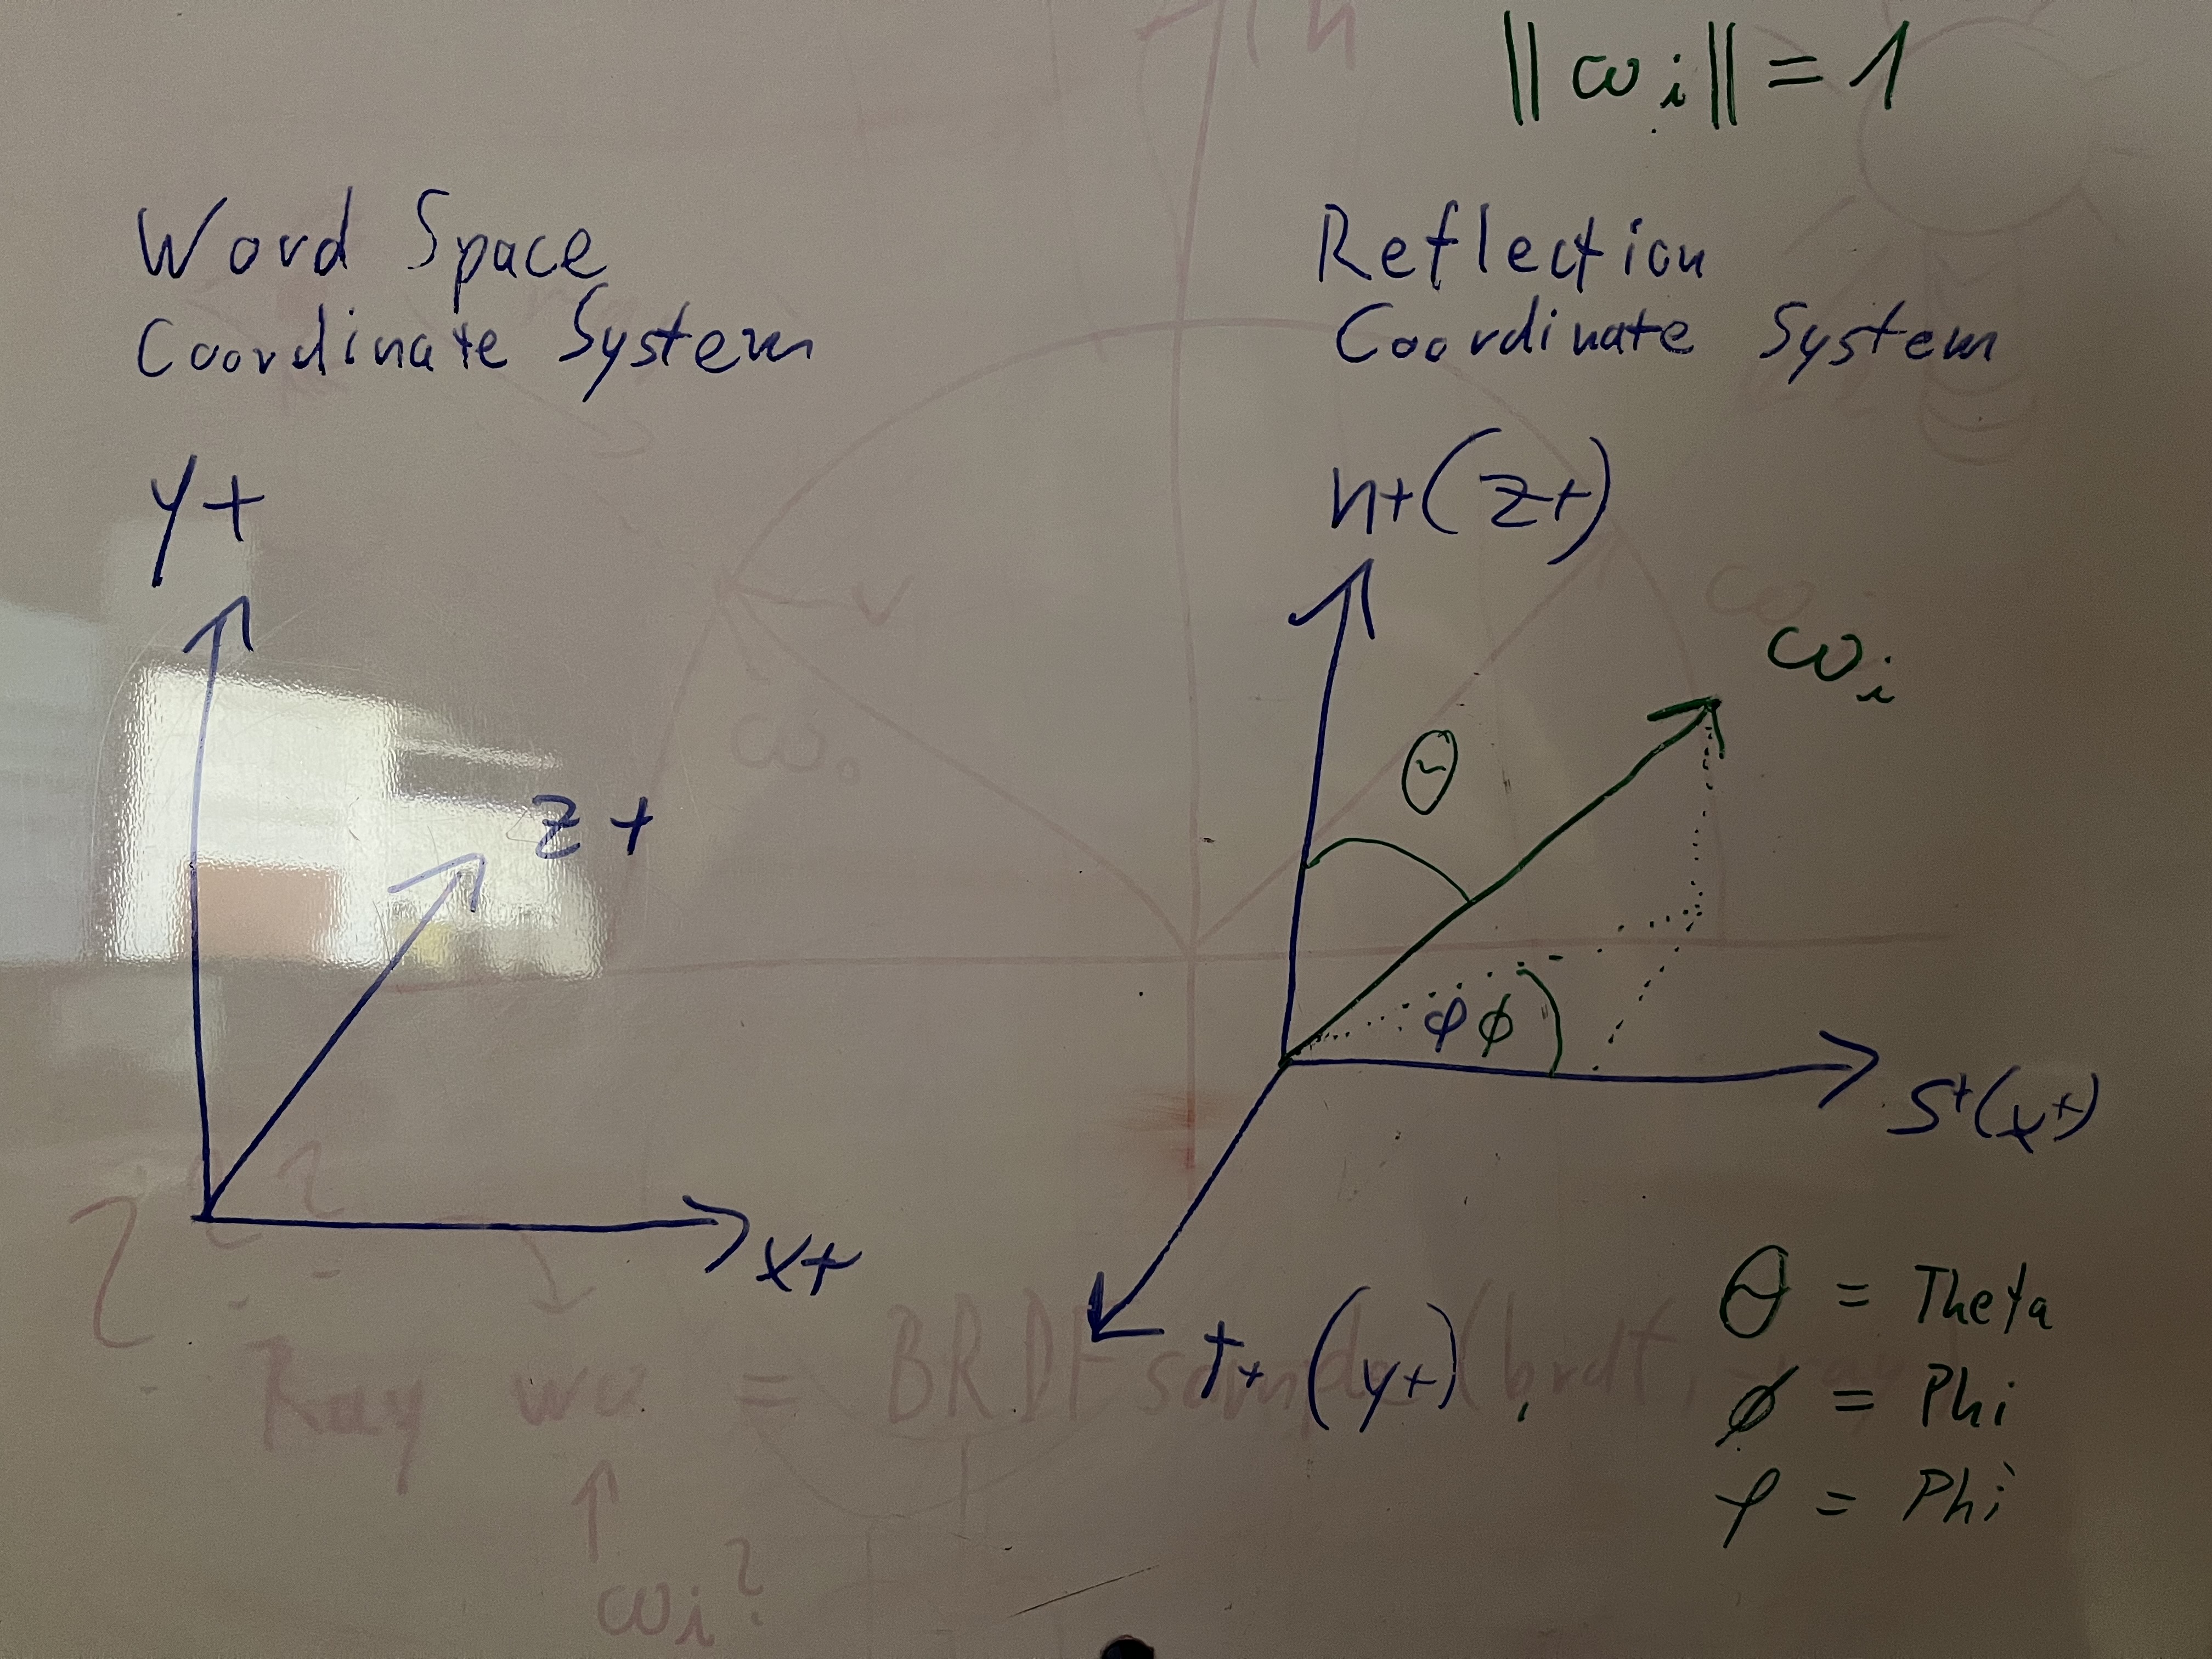 Reflection coordinate system